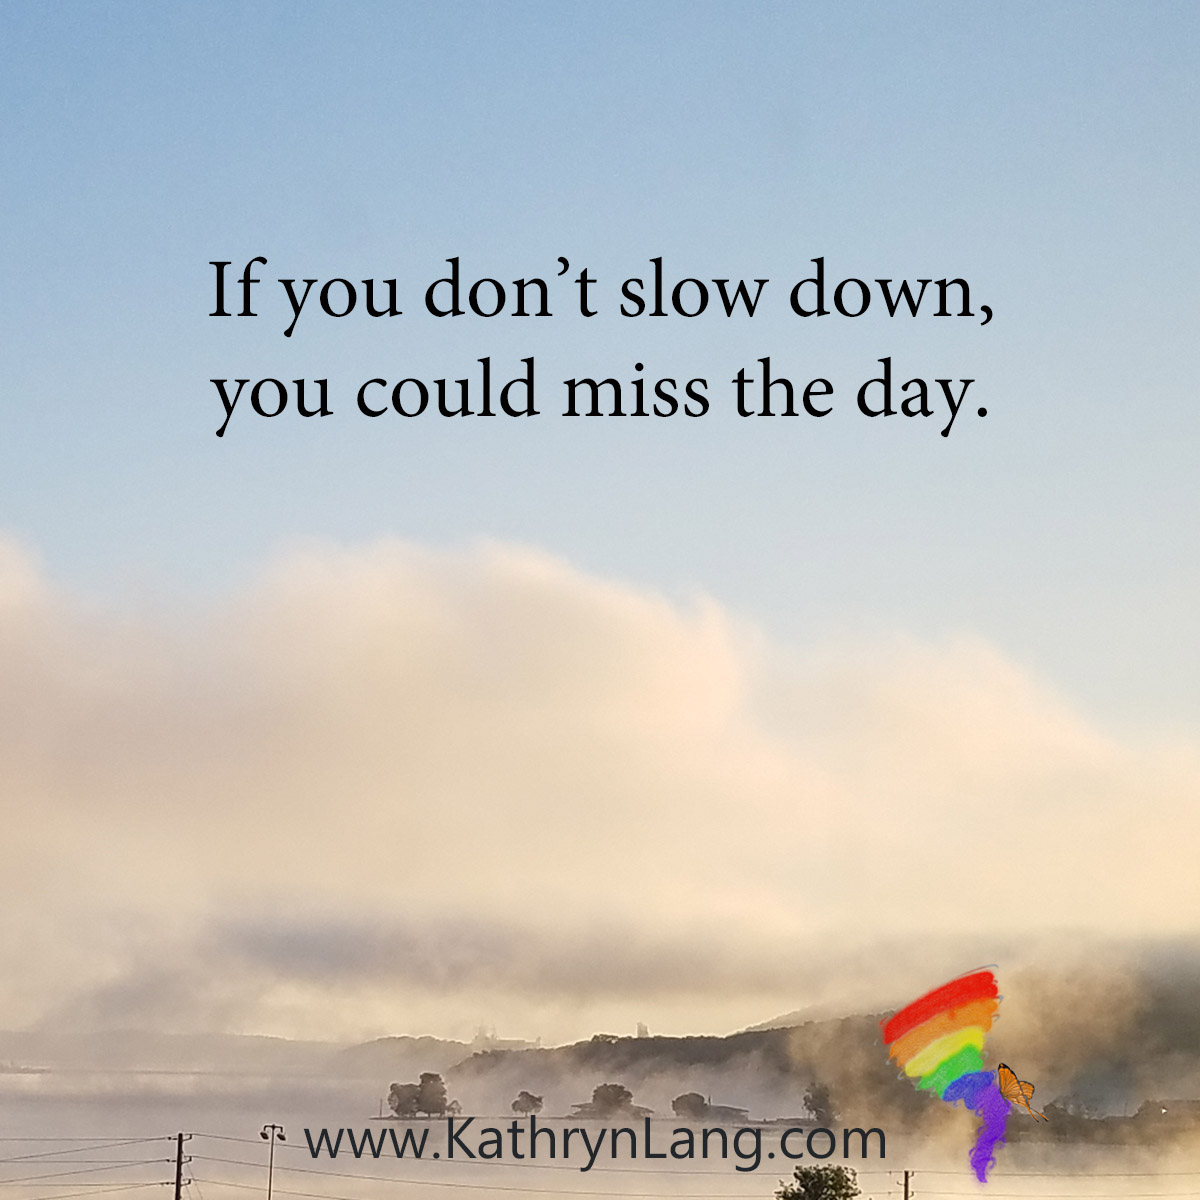 #QuoteoftheDay

If you don’t slow down, you could miss the day.